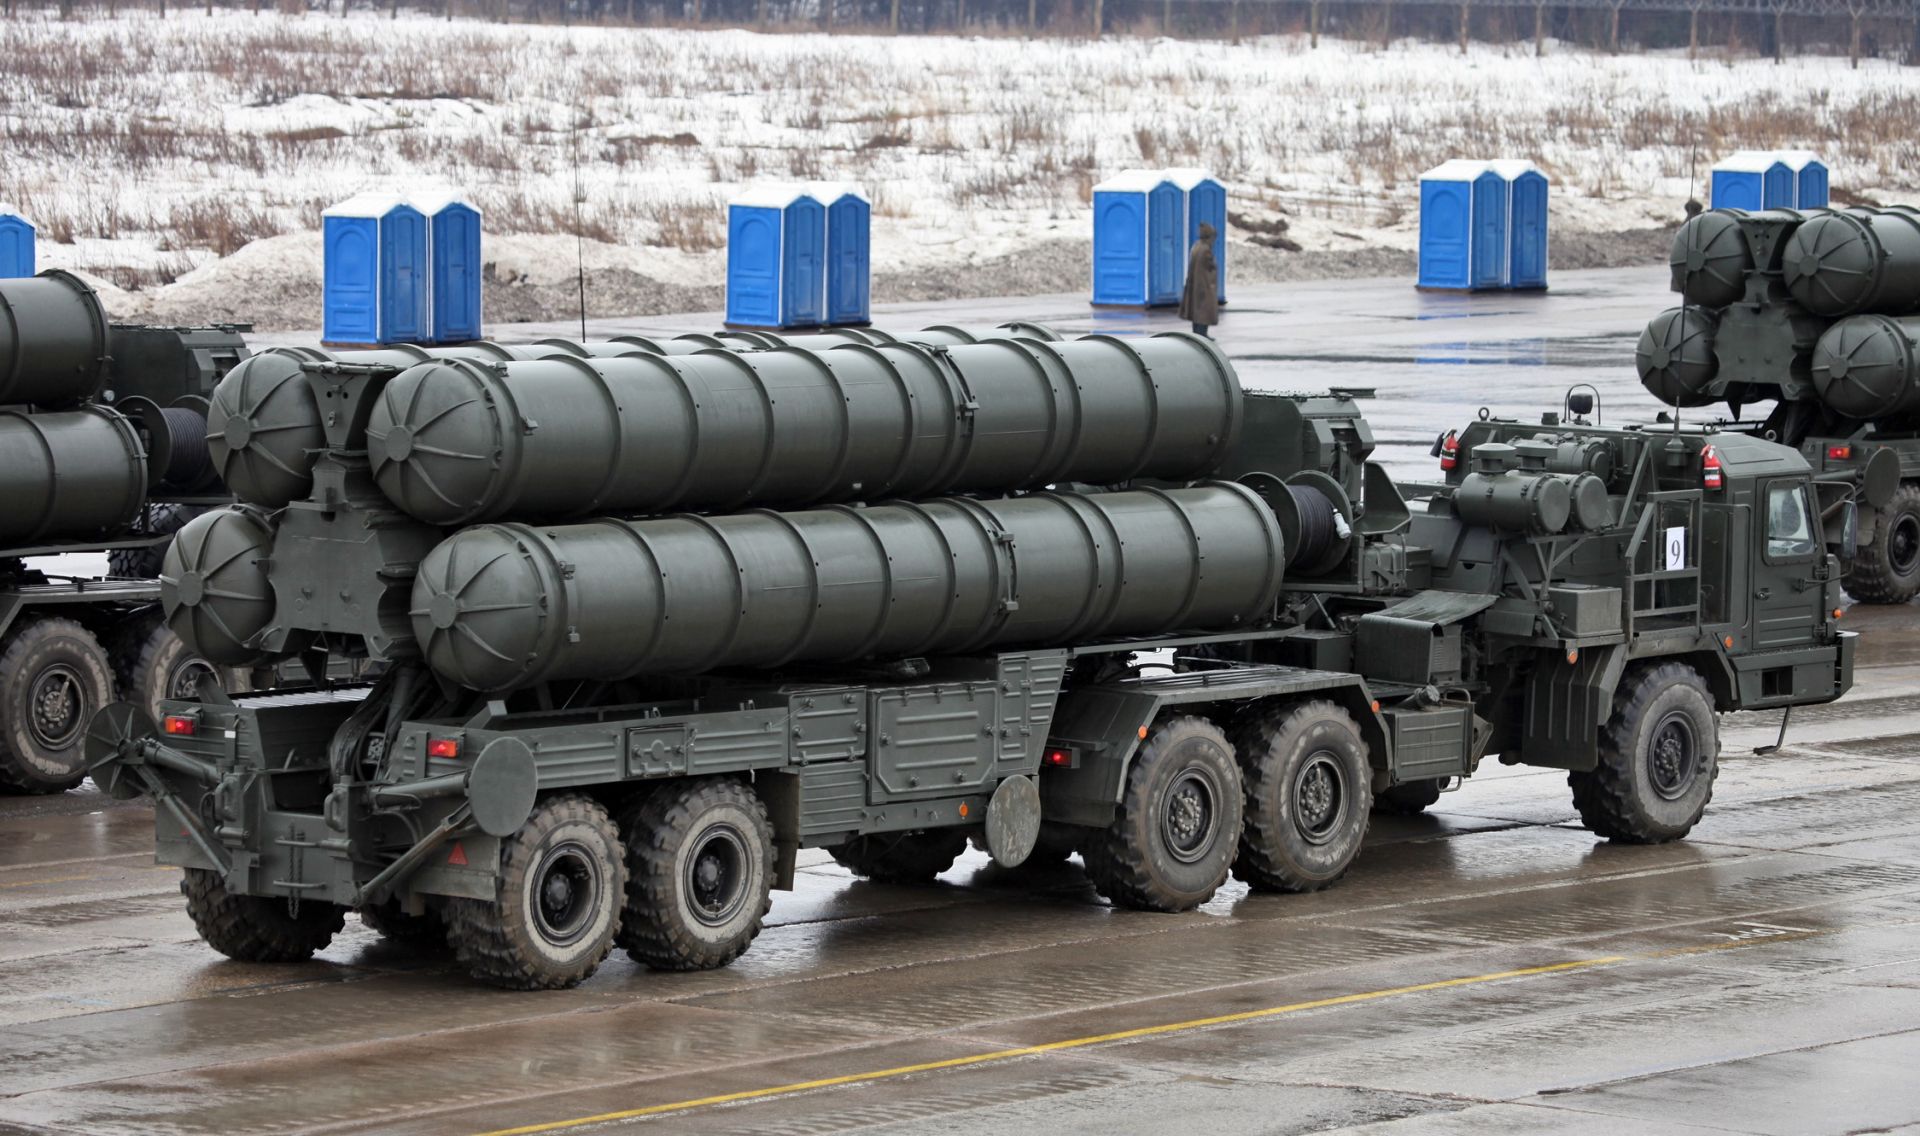 Russia deploys advanced S-400 air missile system to Crimea: agencies